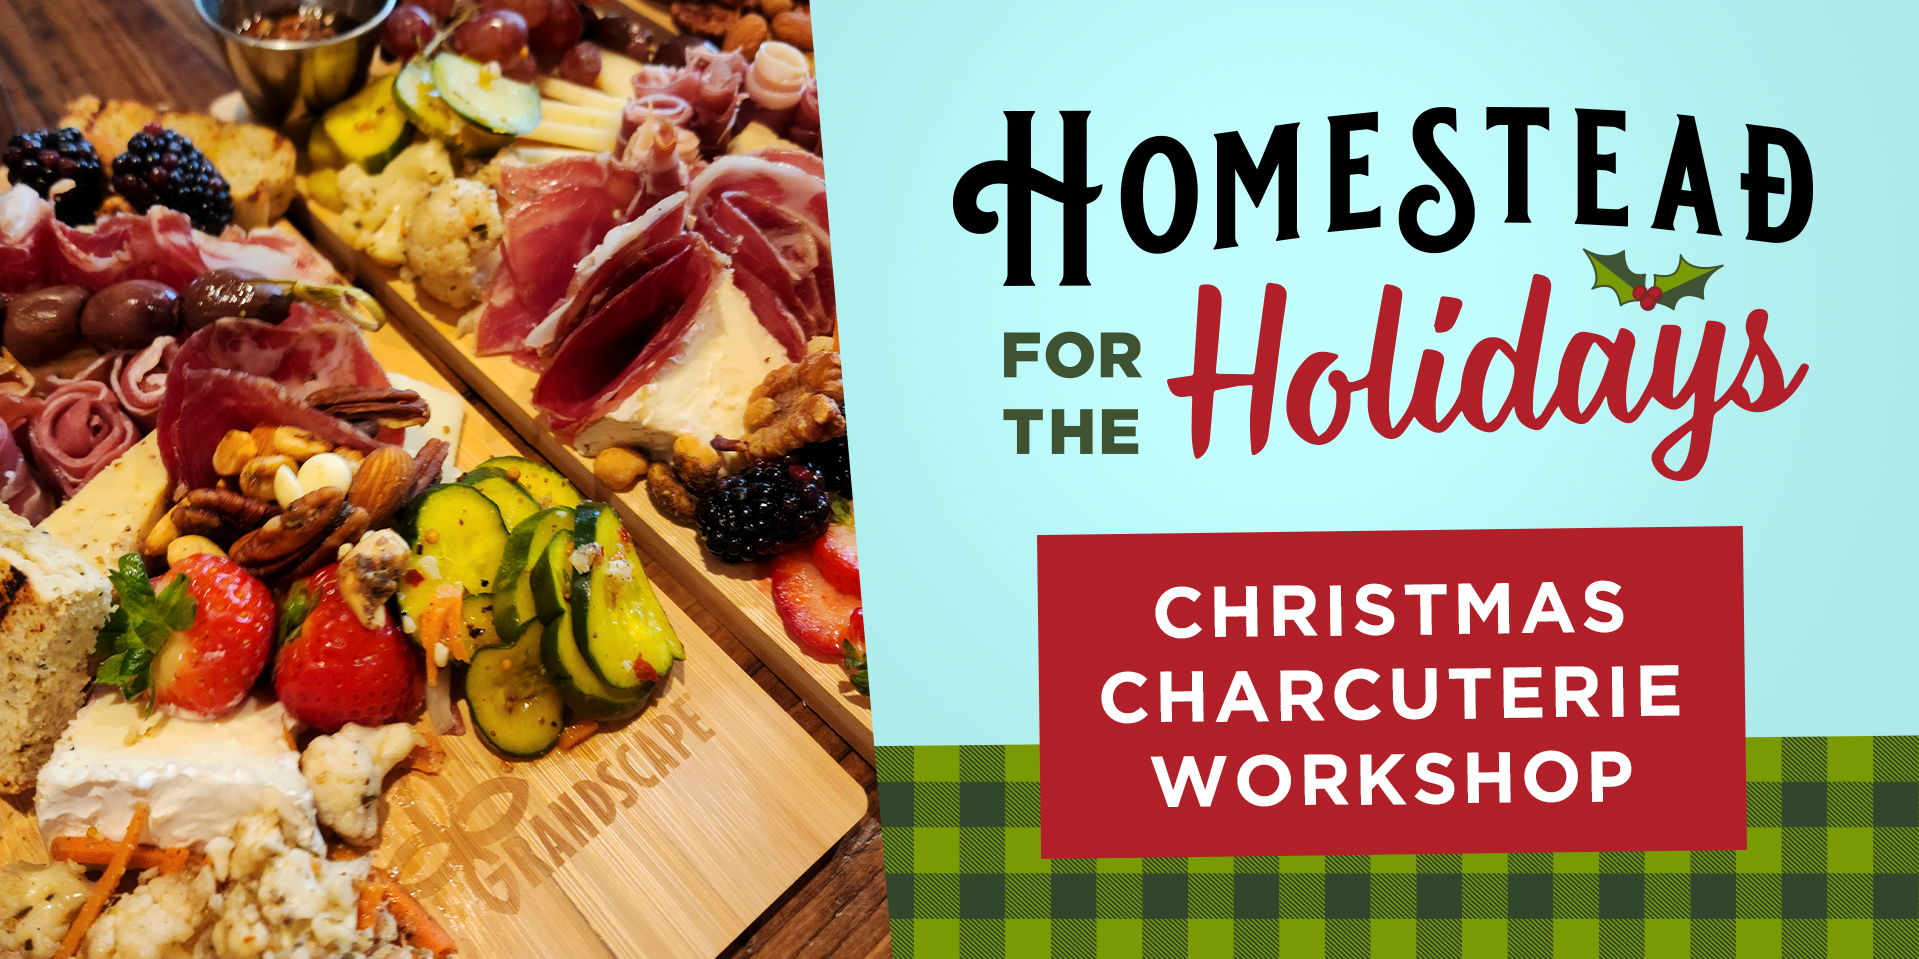 Homestead for the Holidays: Christmas Charcuterie Workshop promotional image